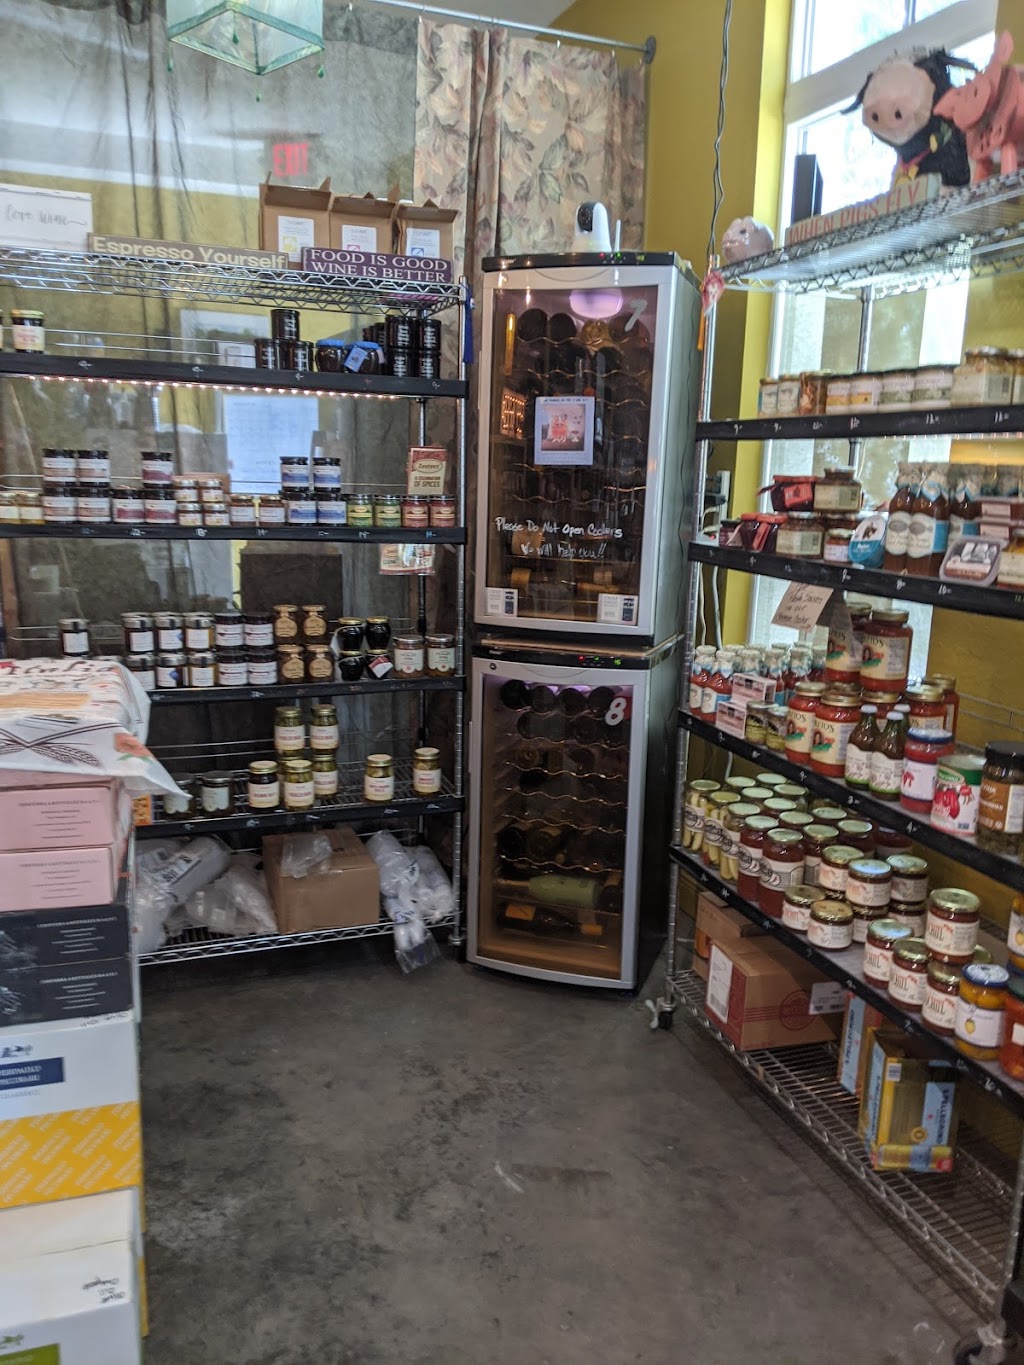 Olive Oil Outpost | 401 Pine Ave, Anna Maria, FL 34216, USA | Phone: (941) 896-3132